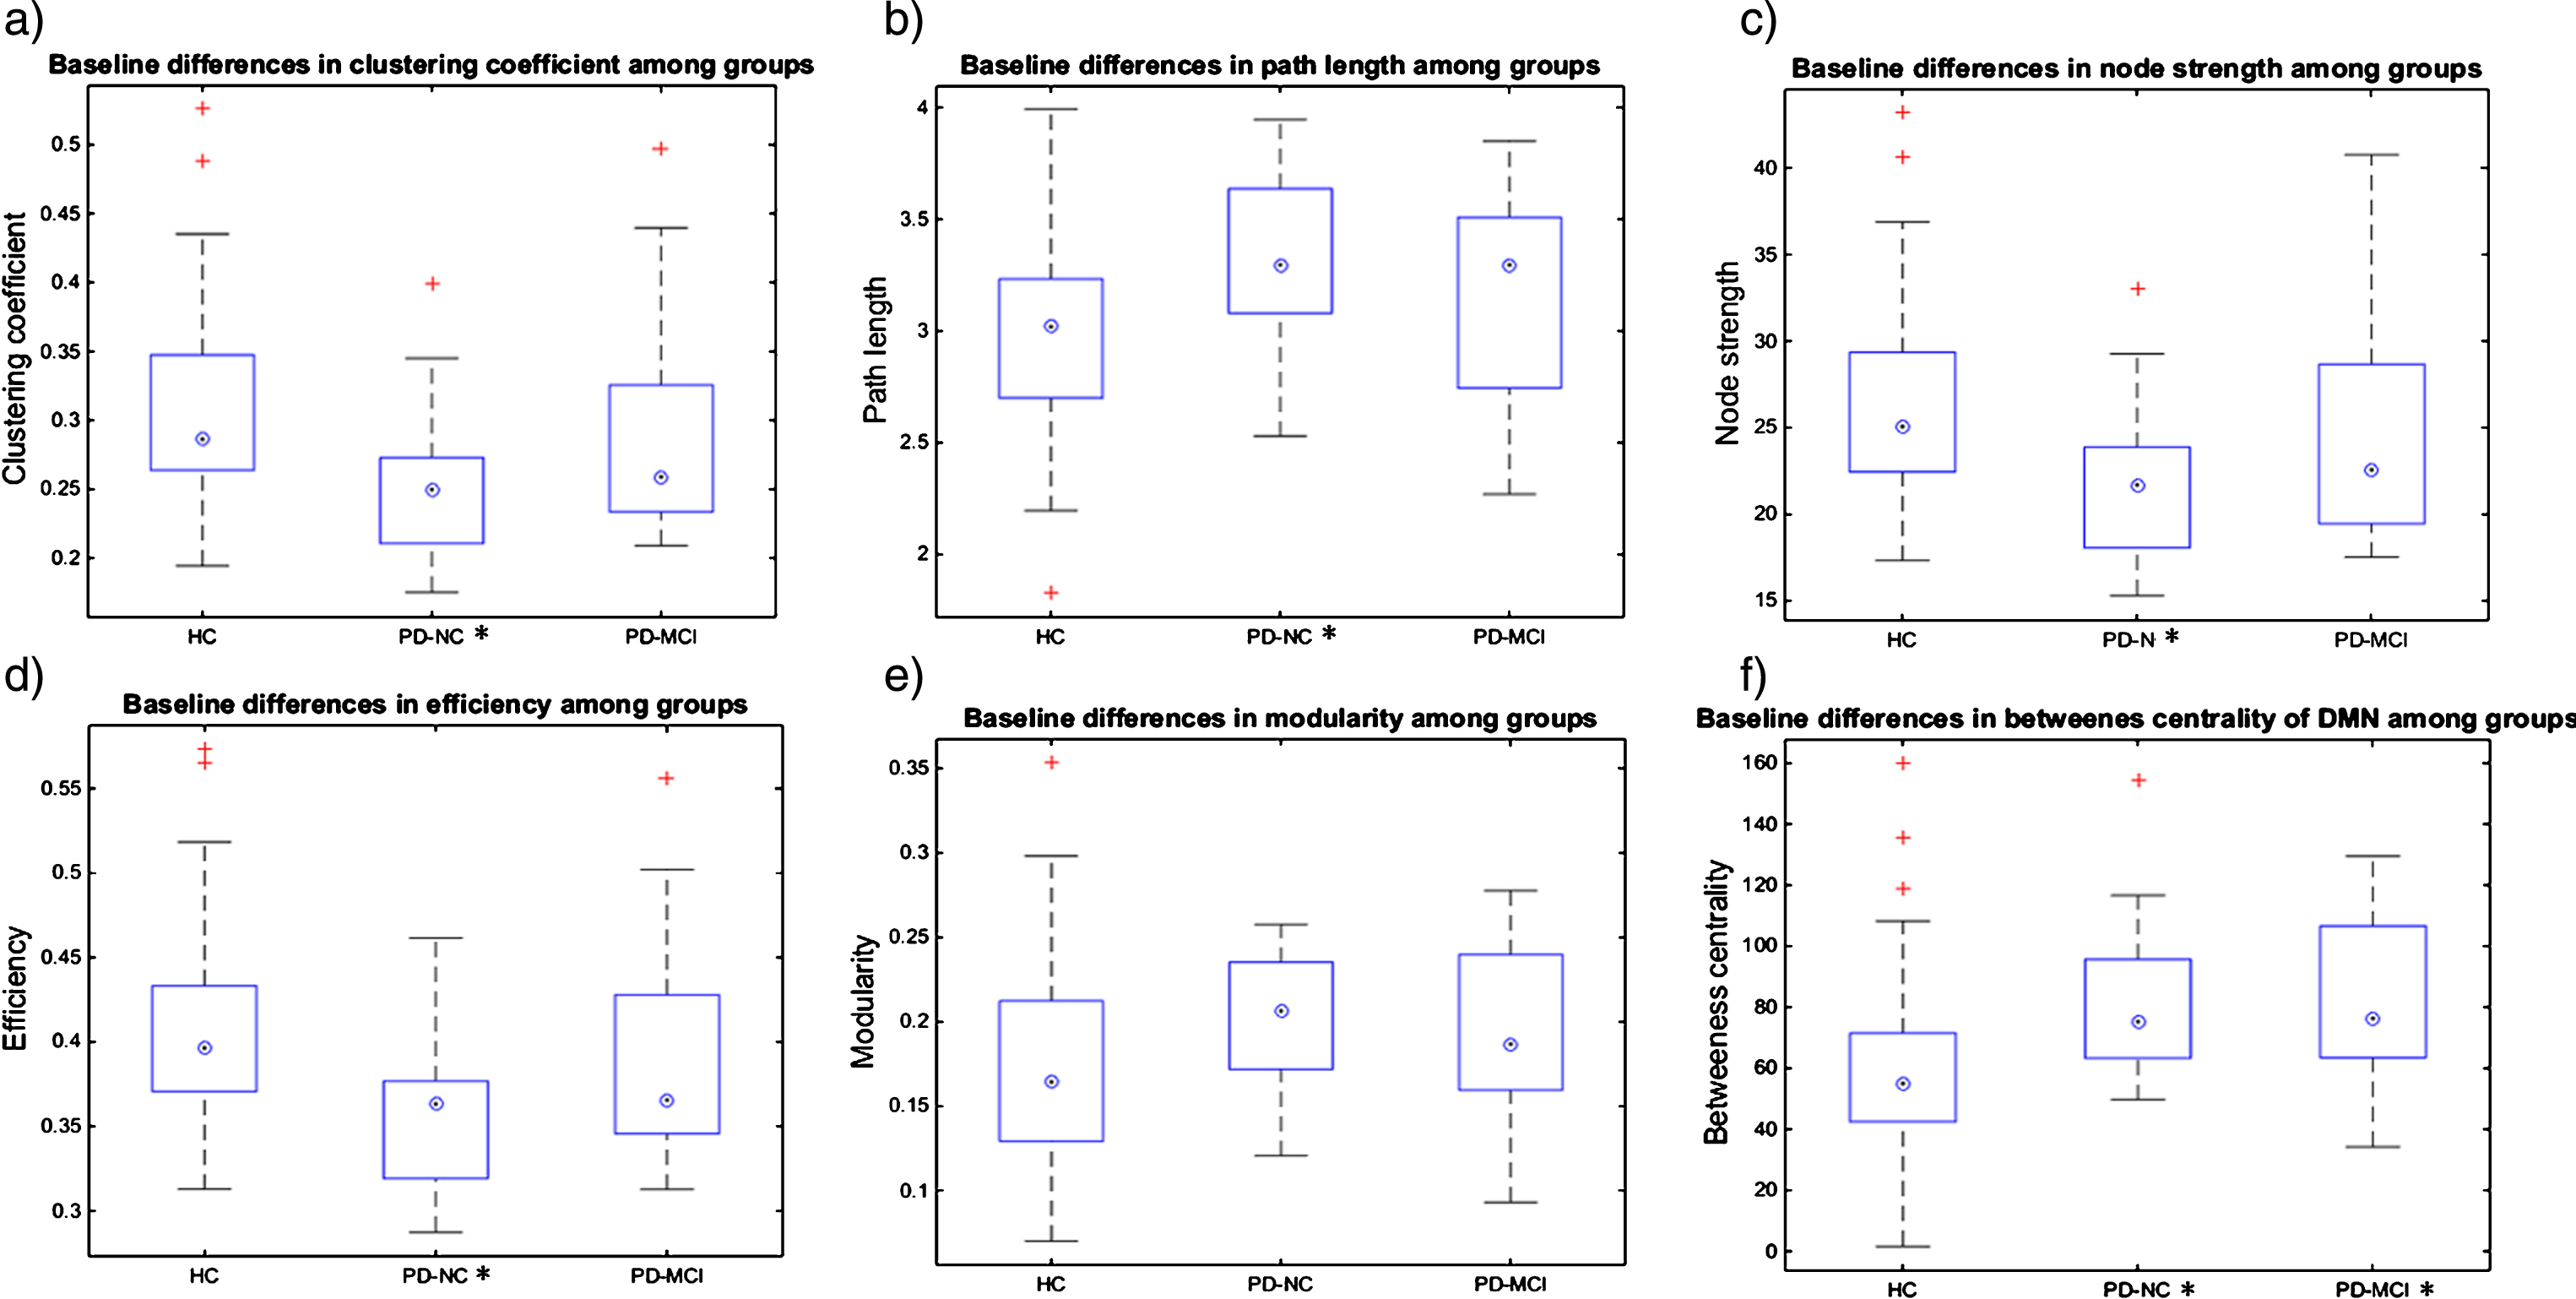 Baseline GT measures and longitudinal changes in HC and PD-all groups. Figure 4a-e shows the baseline differences in global GT measures between groups, *marks the groups that significantly differ from the HC group in a particular GT measure at p <  0.05; Figure 4f shows the baseline differences in local GT measures between groups, *marks the groups that significantly differ from the HC group in a particular GT measure at p < 0.05; on each box the central mark indicates the median, top and bottom box edges indicate the 25th and 75th percentiles, whiskers extend to the most extreme data points not considered outliers and + marks outliers.